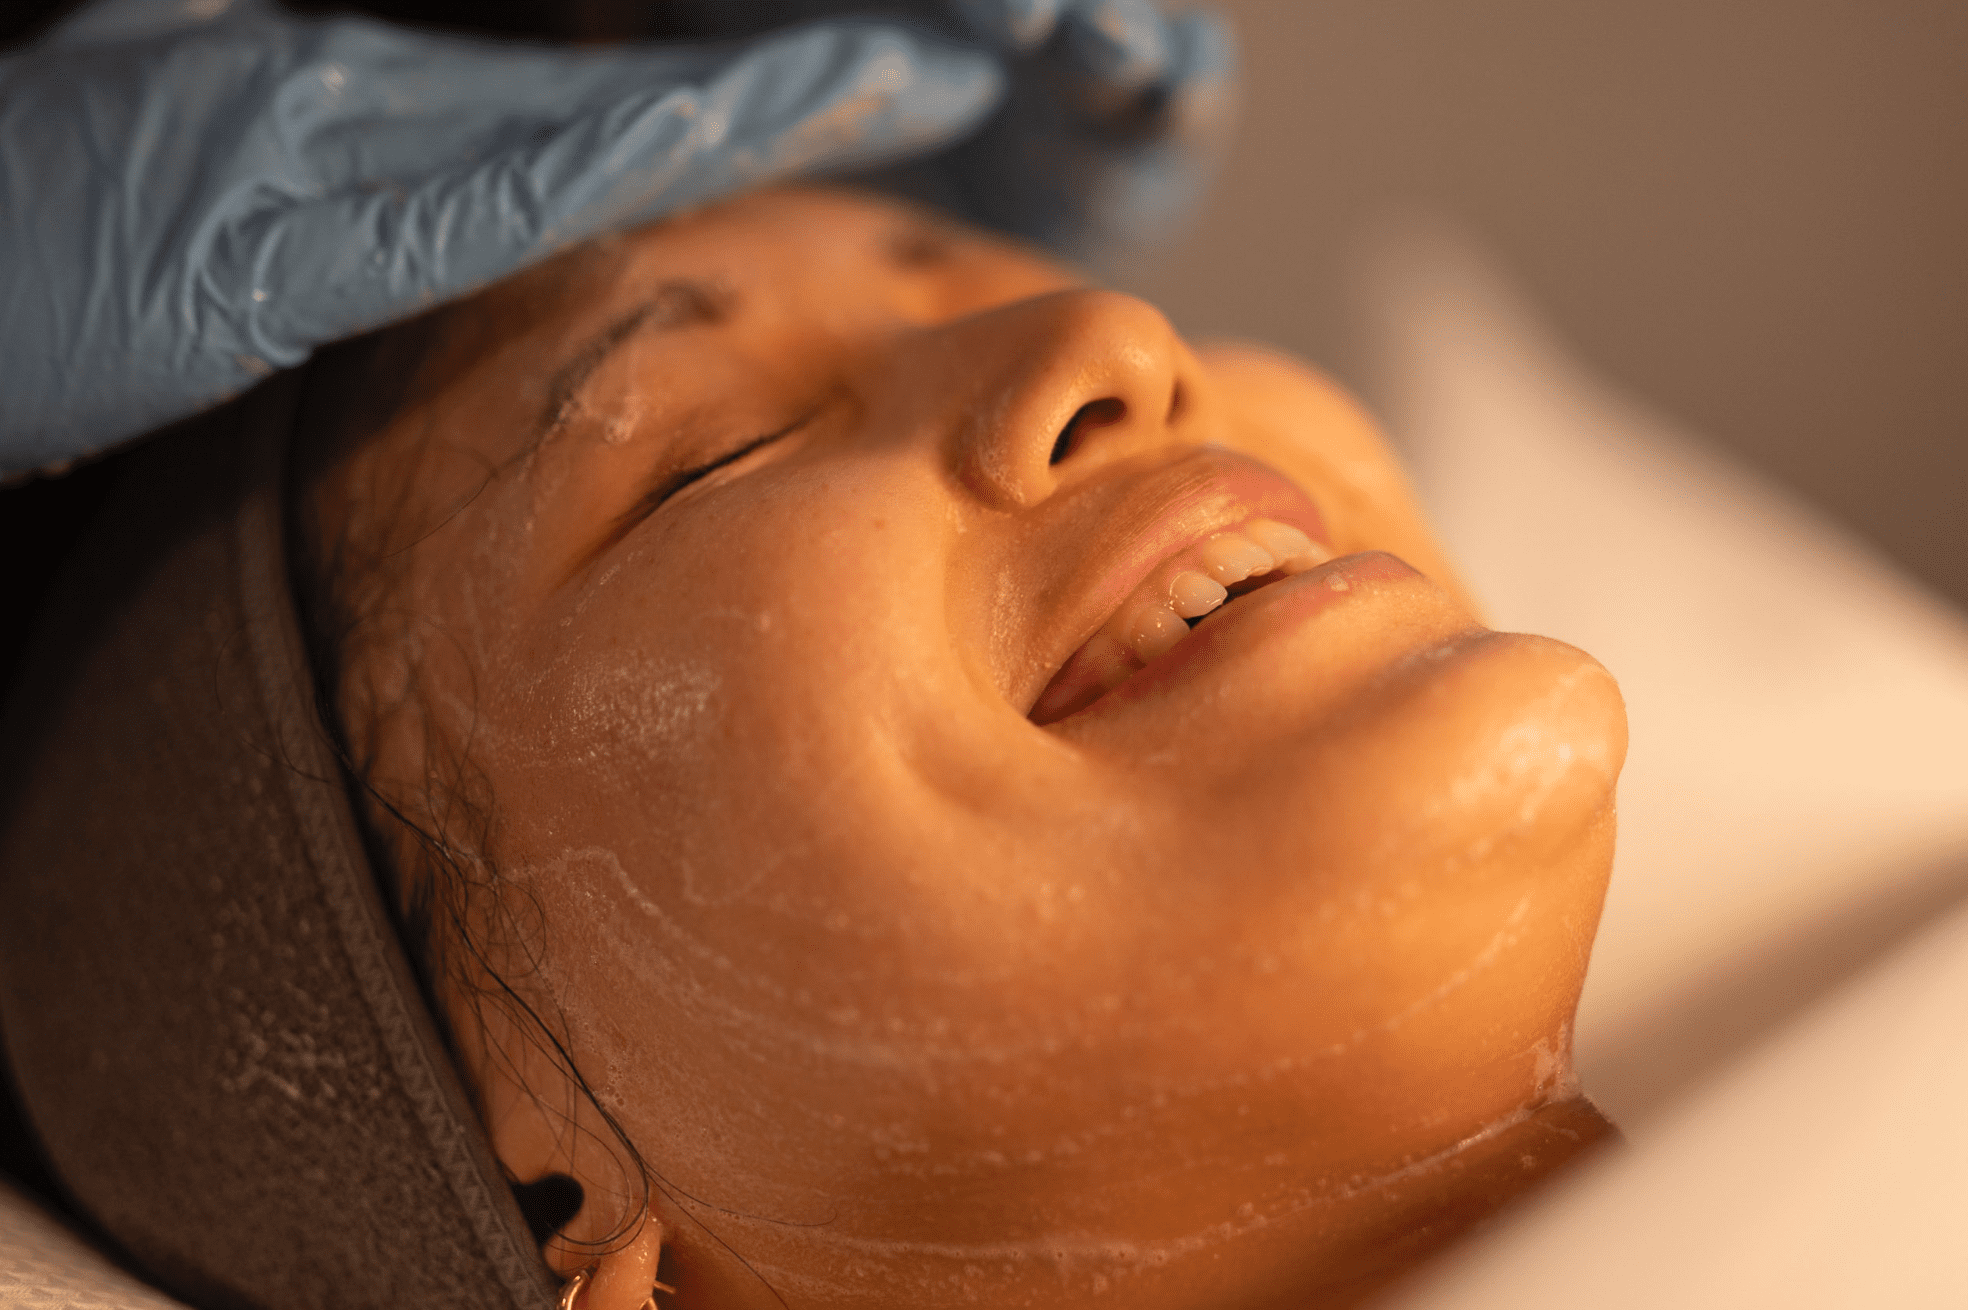 A close-up of a woman receiving a hyperpigmentation treatment, smiling with her eyes closed while a gloved hand applies Dermamelan to her forehead under warm lighting.